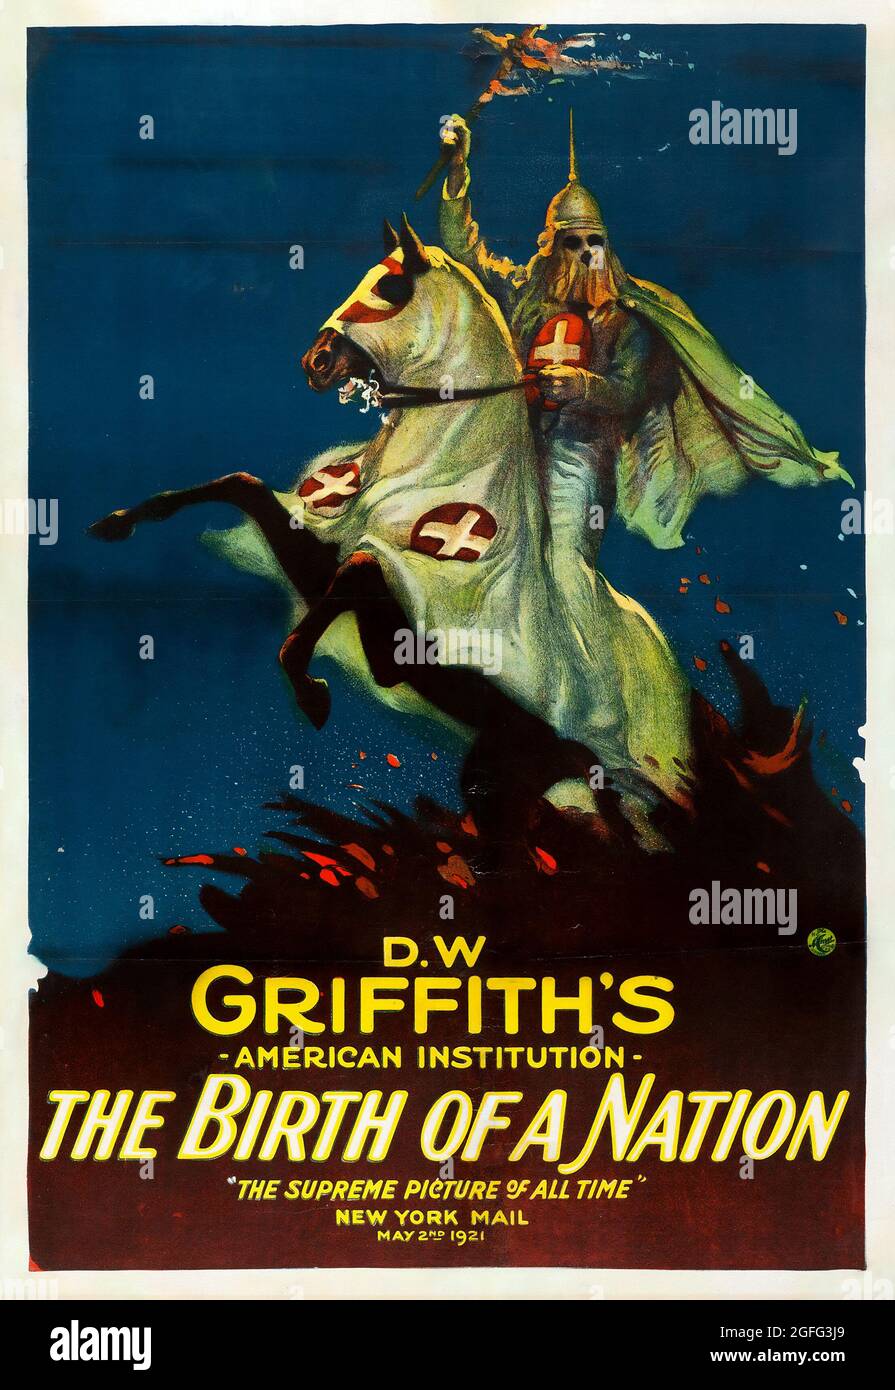 Movie poster (remake 1921) The Birth of a Nation, originally called The Clansman, is a 1915 American silent epic drama film starring Lillian Gish. Stock Photo